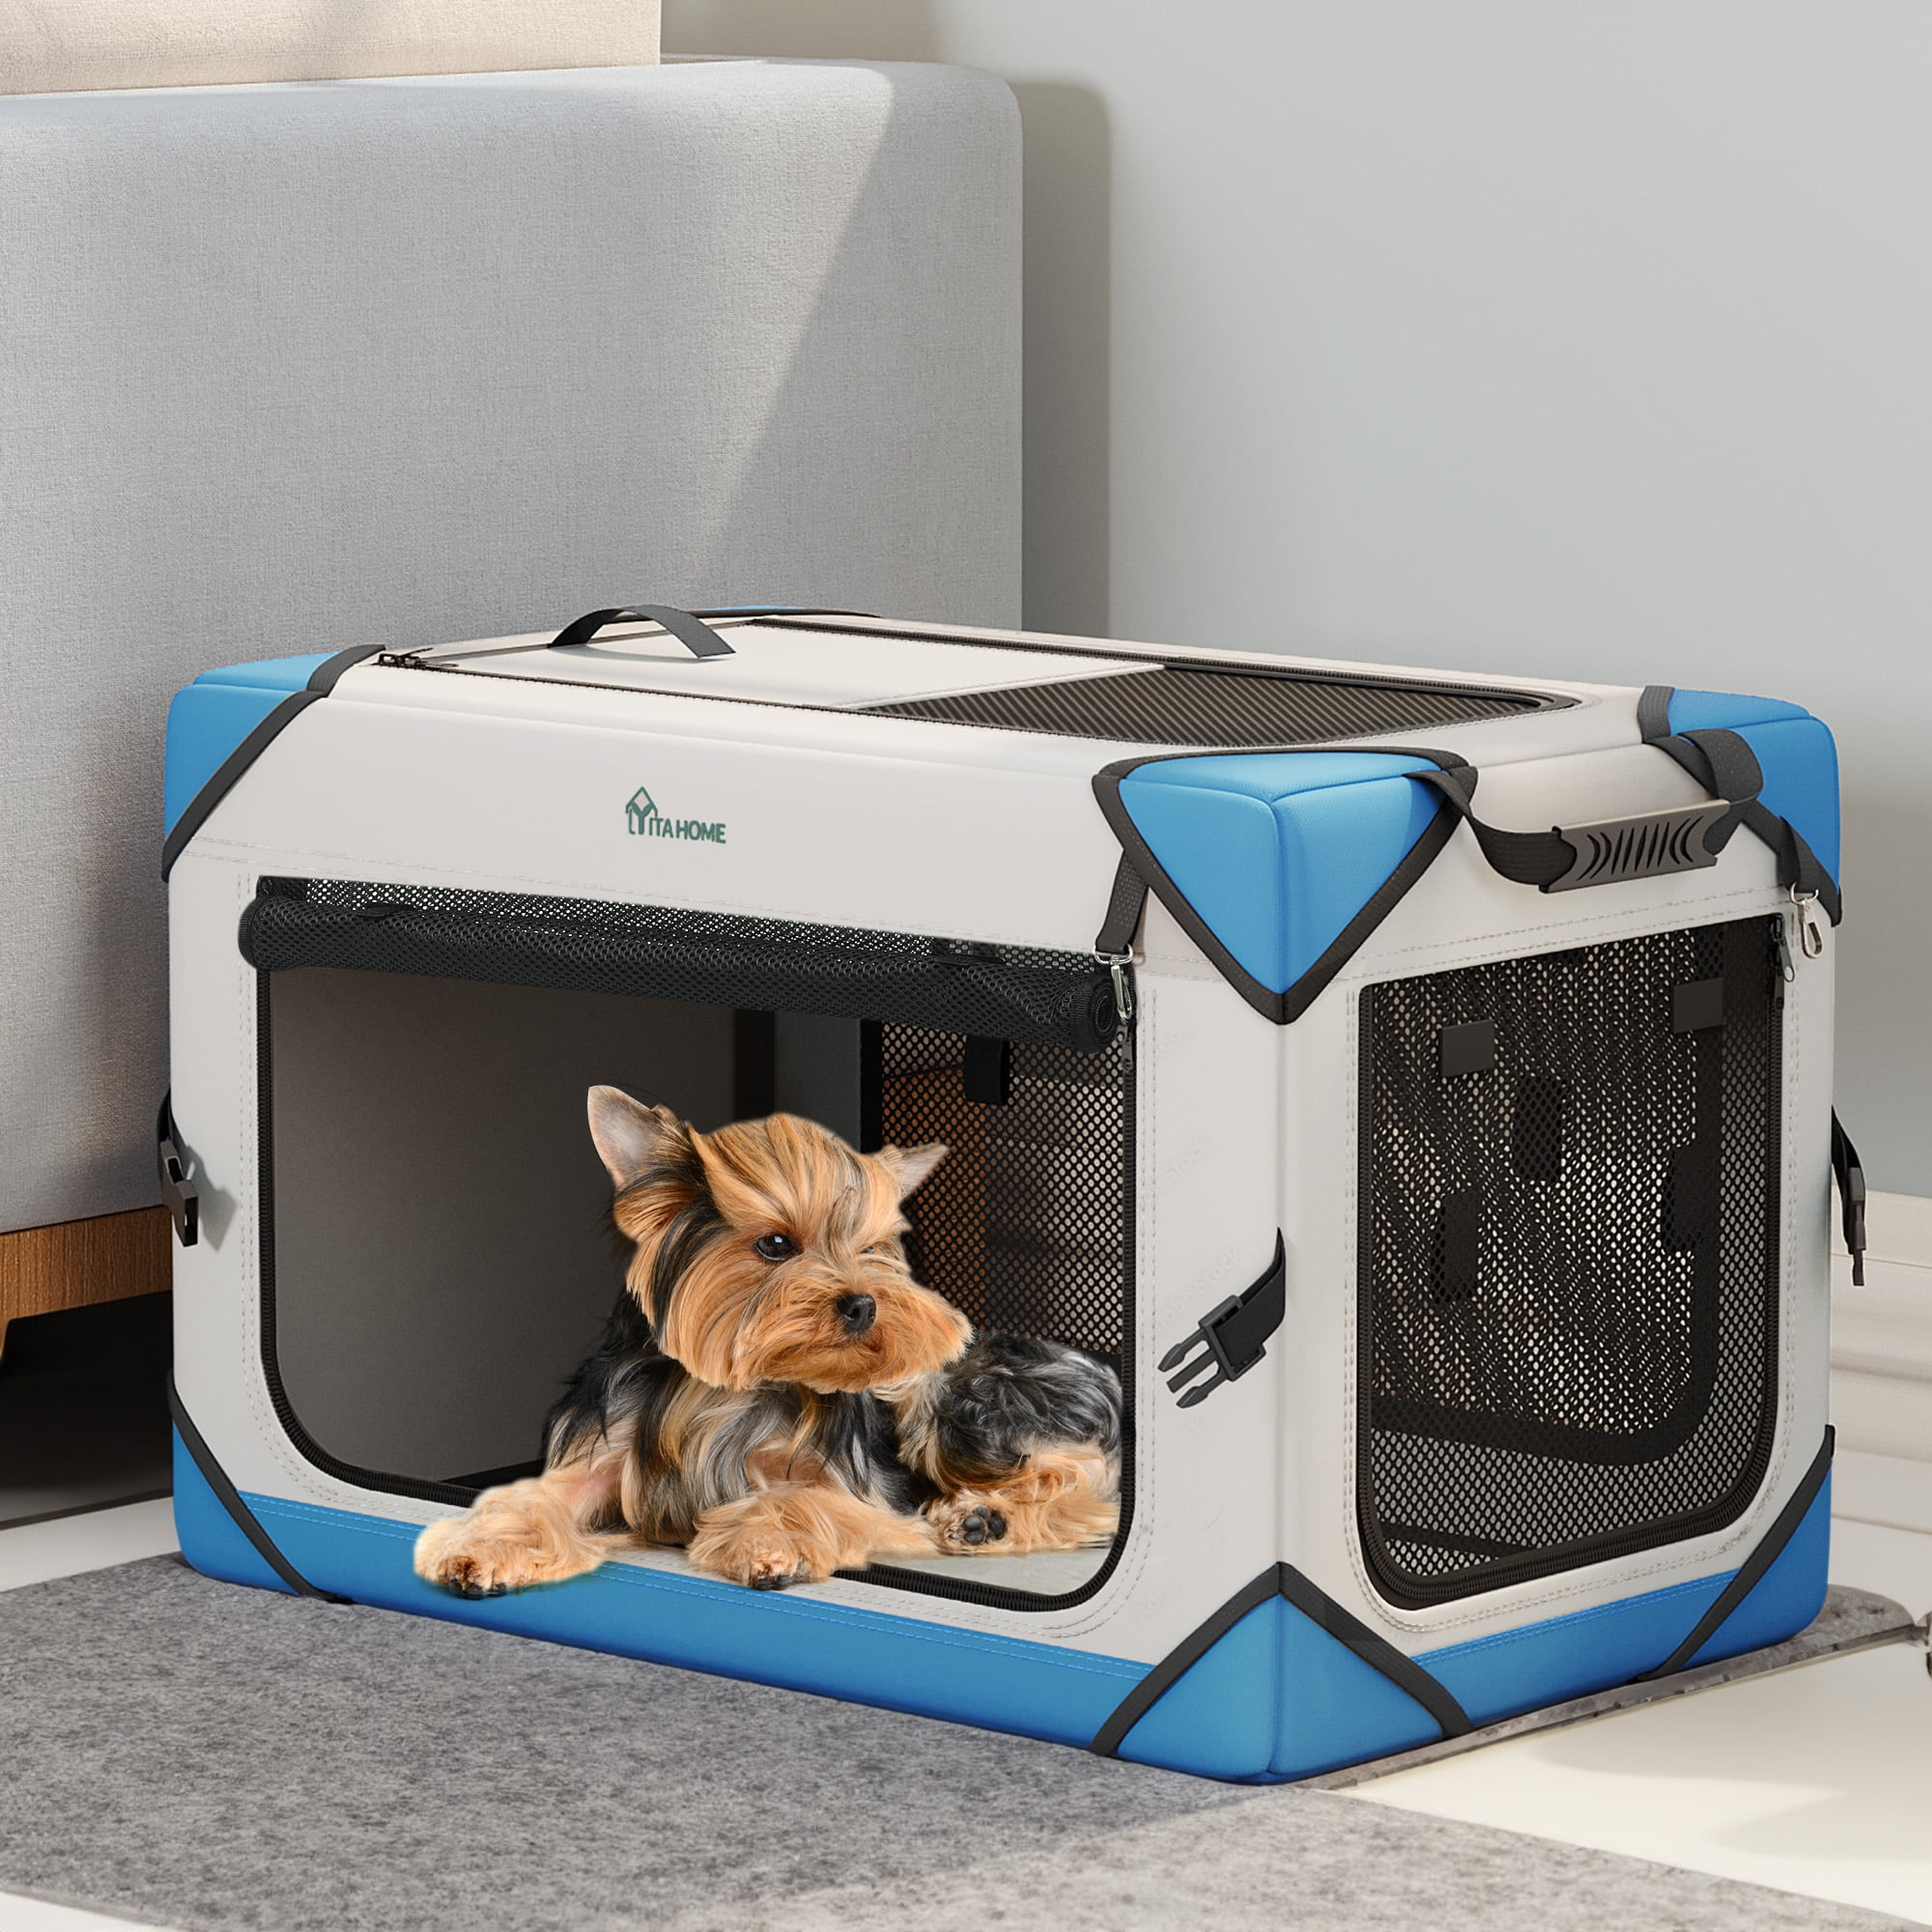 Mr. Peanut's Soft Sided Portable Pet Crate with Lightweight Aluminum Frame